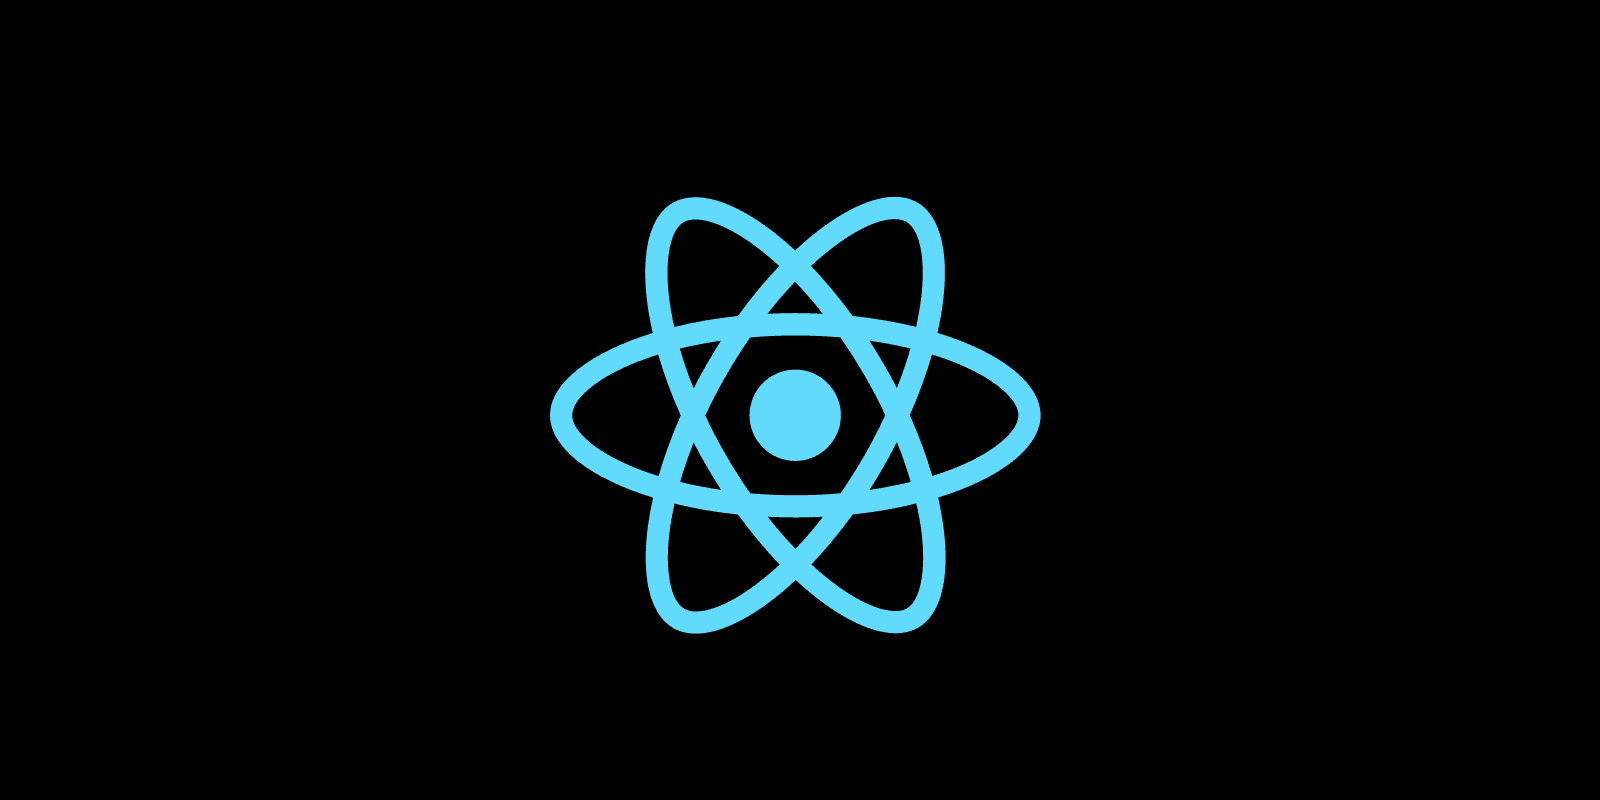 How to trigger data fetching with React hooks?